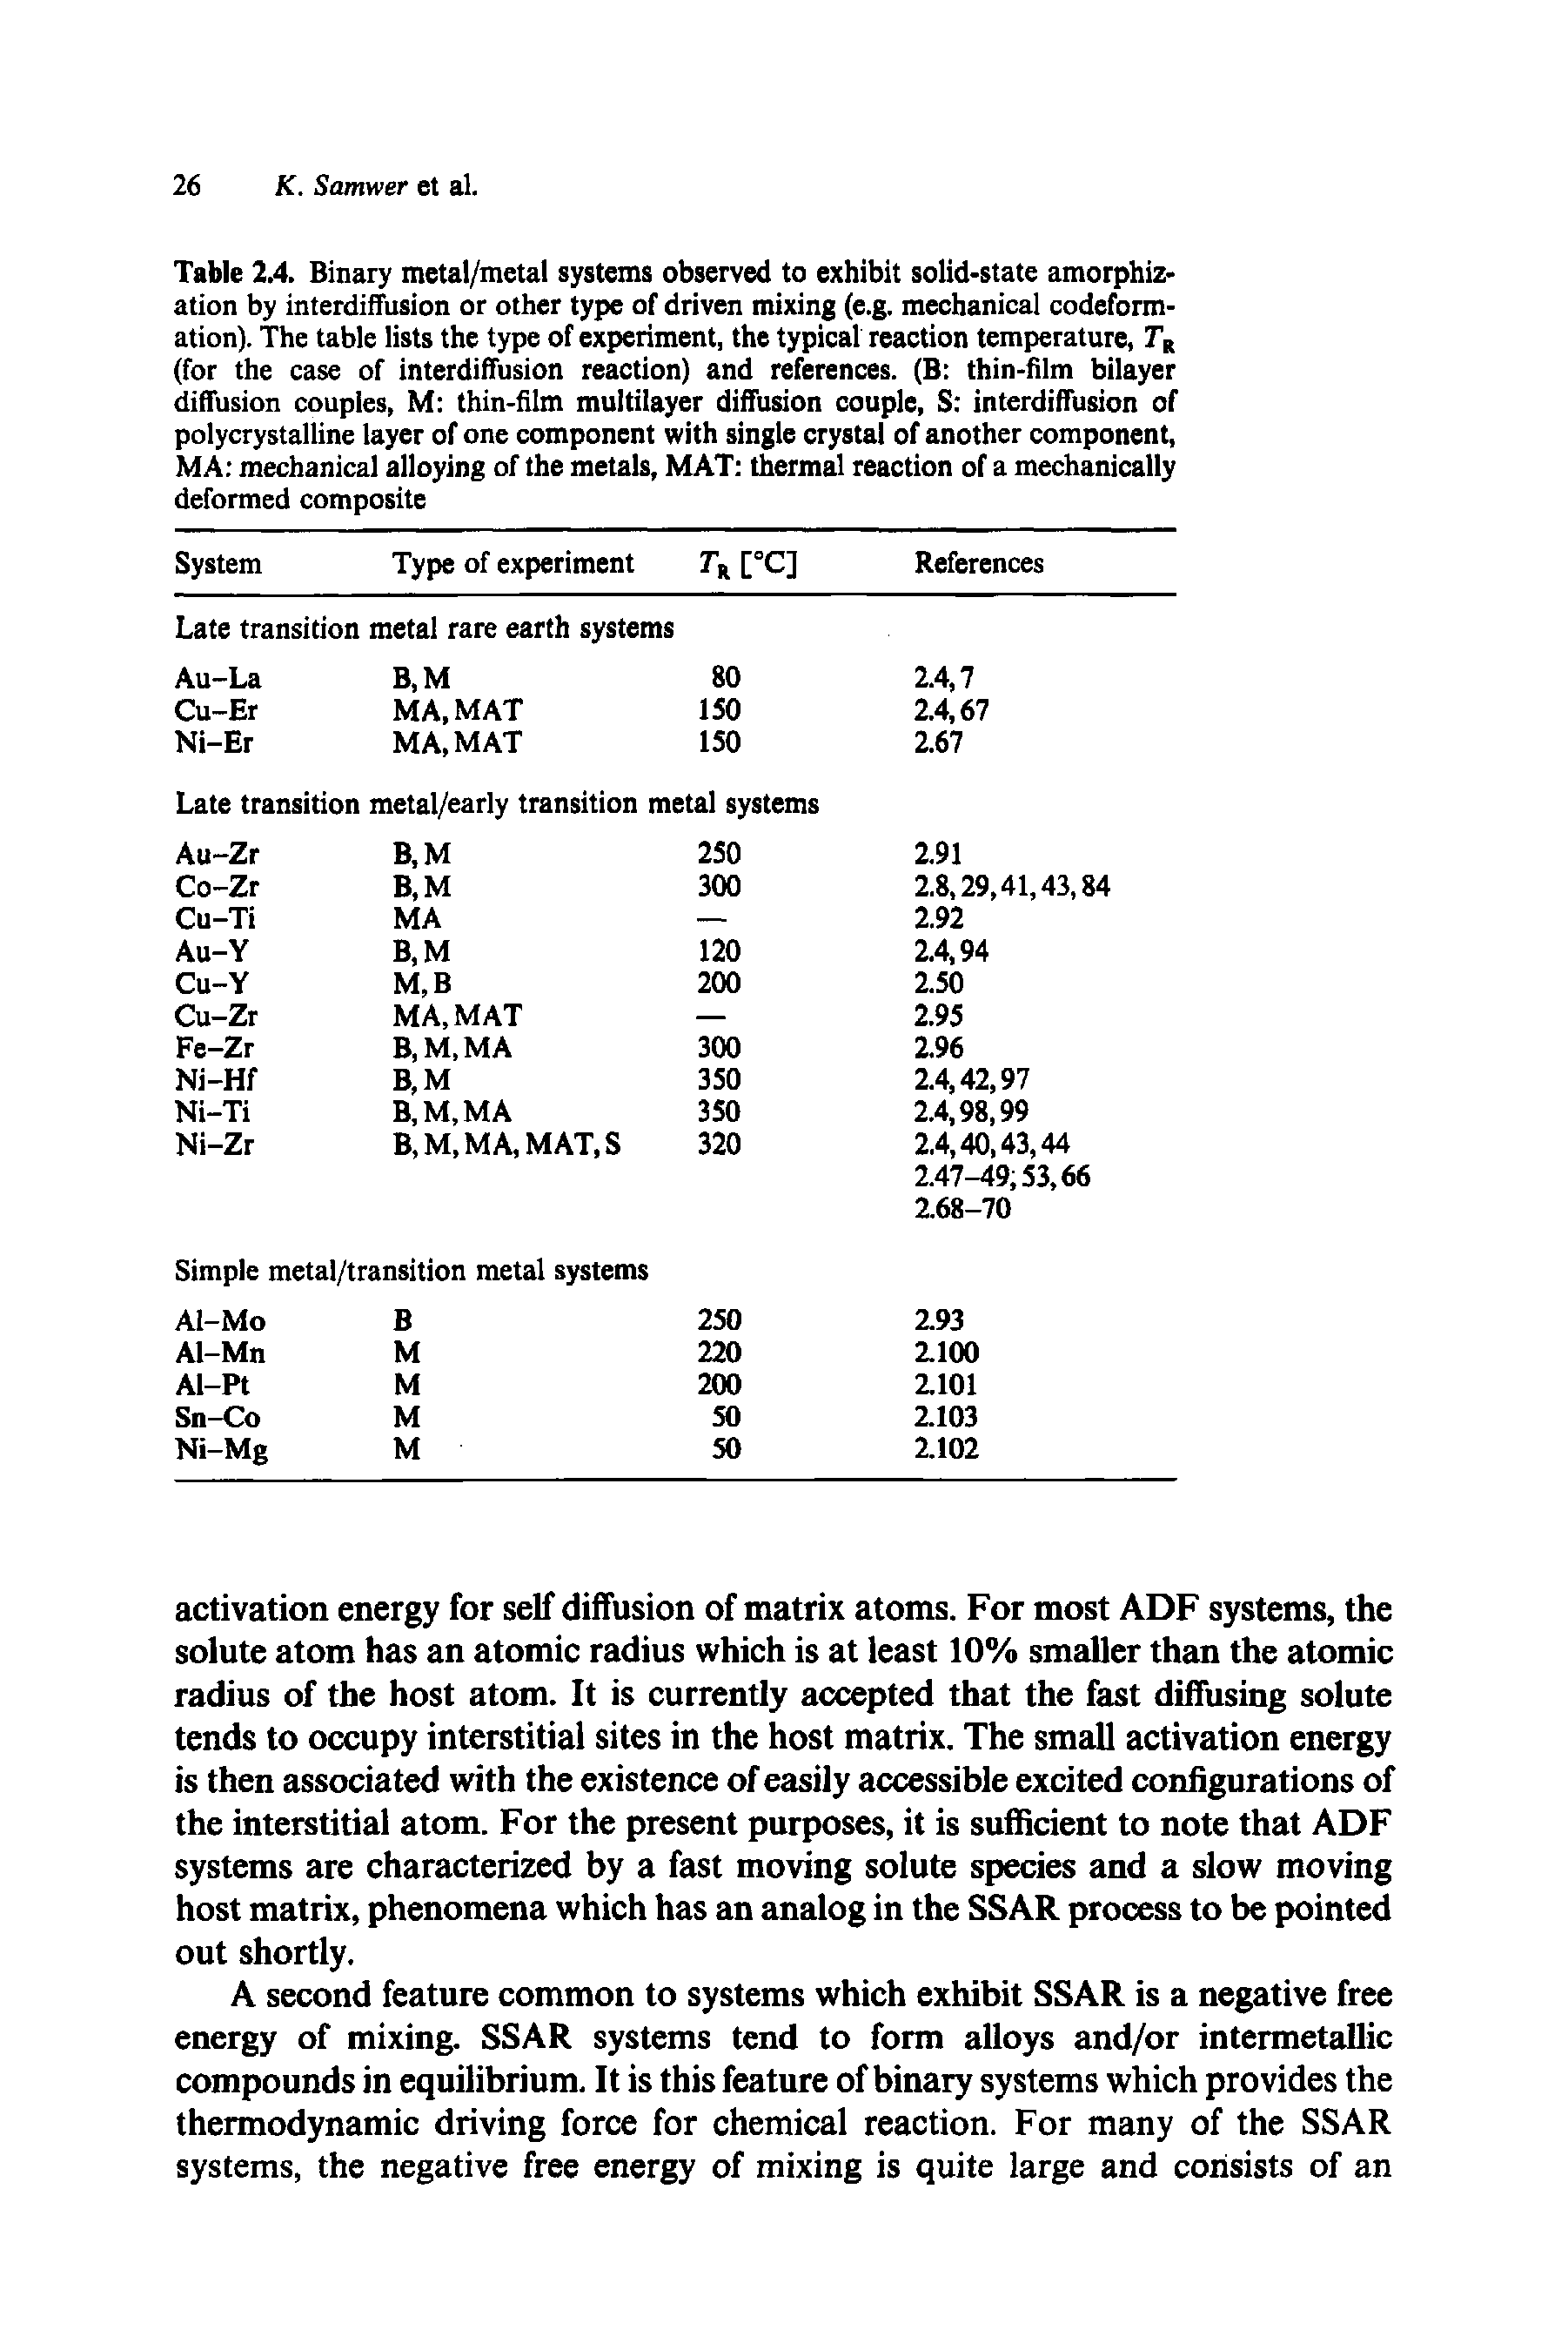 Table 2.4. Binary metal/metal systems observed to exhibit solid-state amorphiz-ation by interdiffusion or other type of driven mixing (e.g. mechanical codeformation). The table lists the type of experiment, the typical reaction temperature, TR (for the case of interdiffusion reaction) and references. (B thin-film bilayer diffusion couples, M thin-film multilayer diffusion couple, S interdiffusion of polycrystalline layer of one component with single crystal of another component, MA mechanical alloying of the metals, MAT thermal reaction of a mechanically deformed composite...